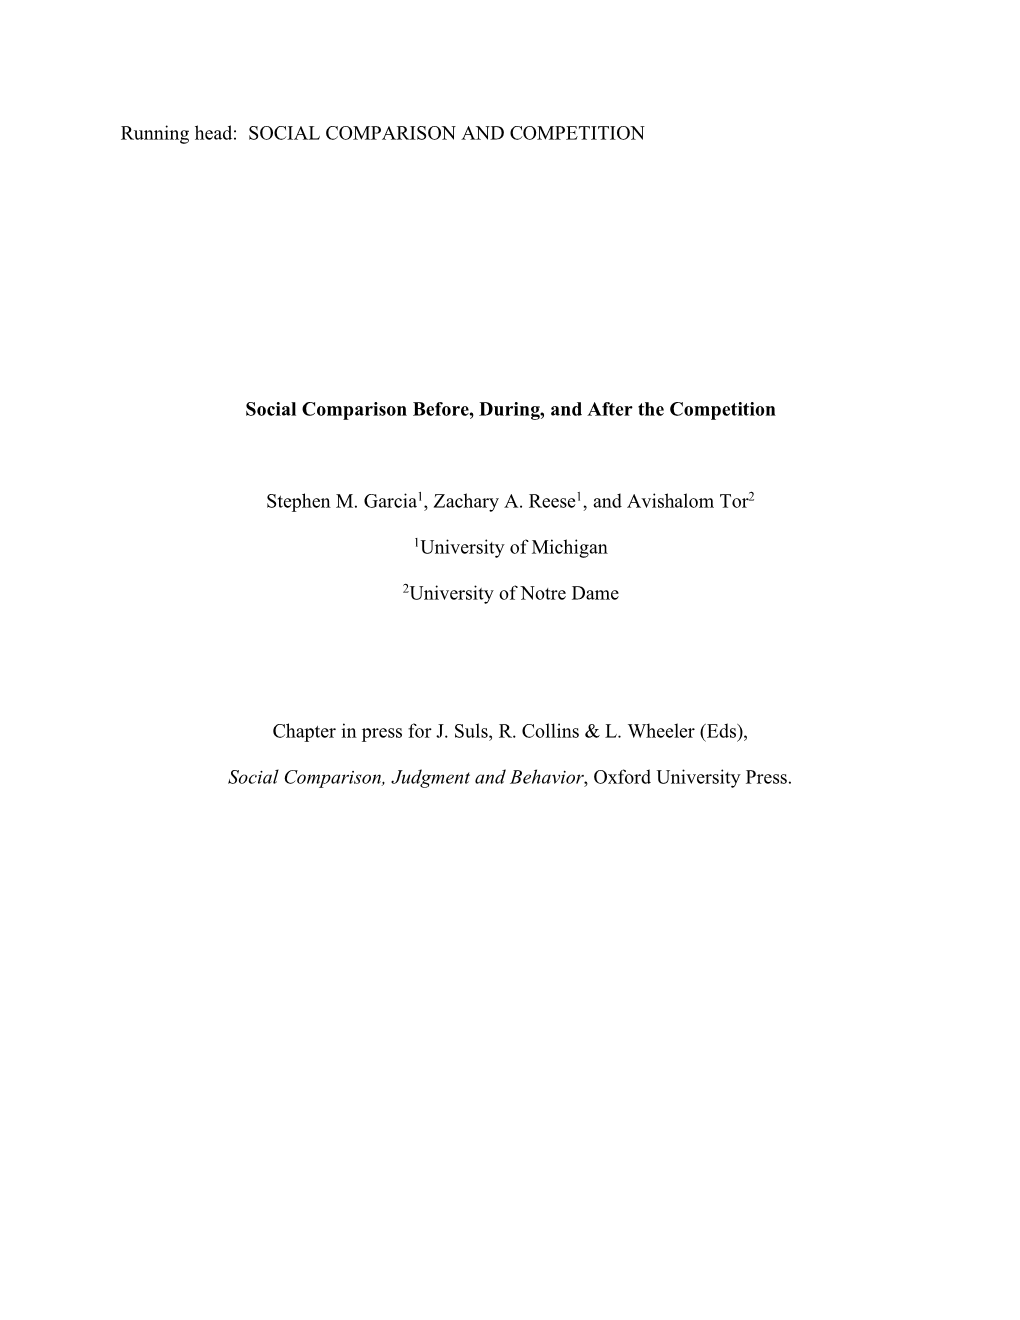 Social Comparison and Competition Chapter in Press